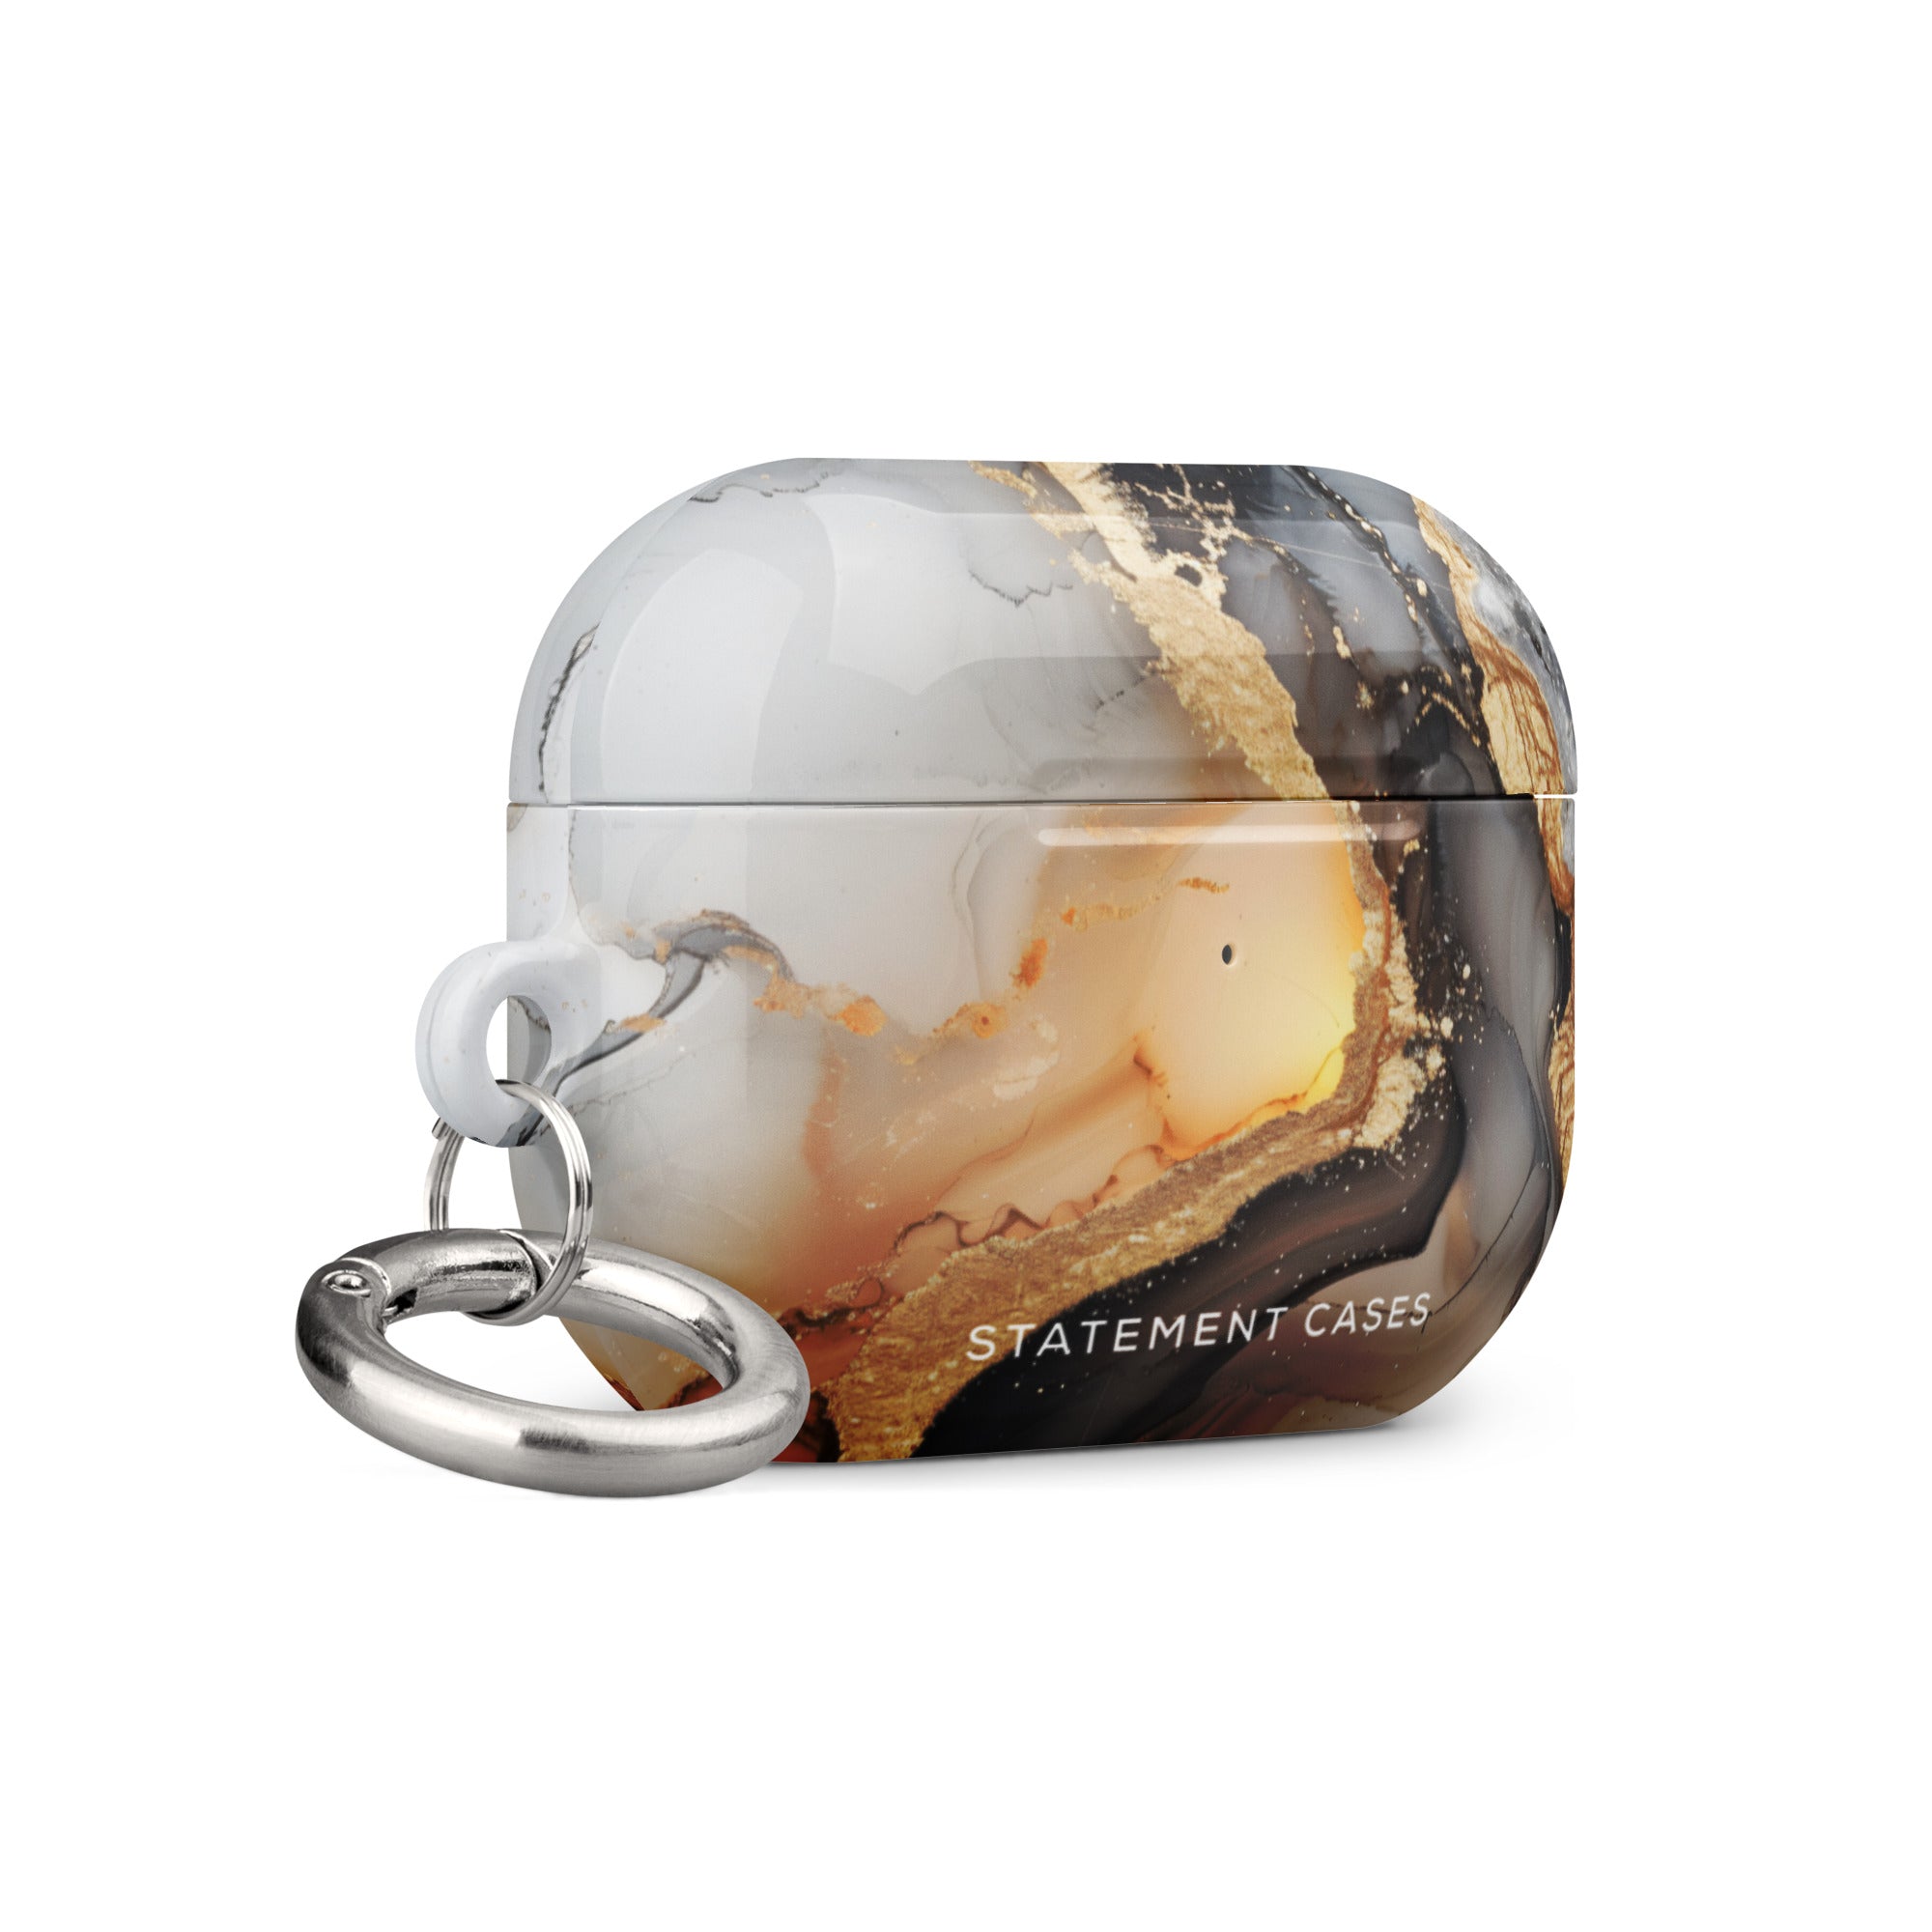 A rectangular Lunar & Gold Marble for AirPods Pro Gen 2 case with a keyring attachment and impact-absorbing design features a marbled pattern in hues of white, grey, brown, and gold accents. The text "Statement Cases" is printed on the lower front part of the case.